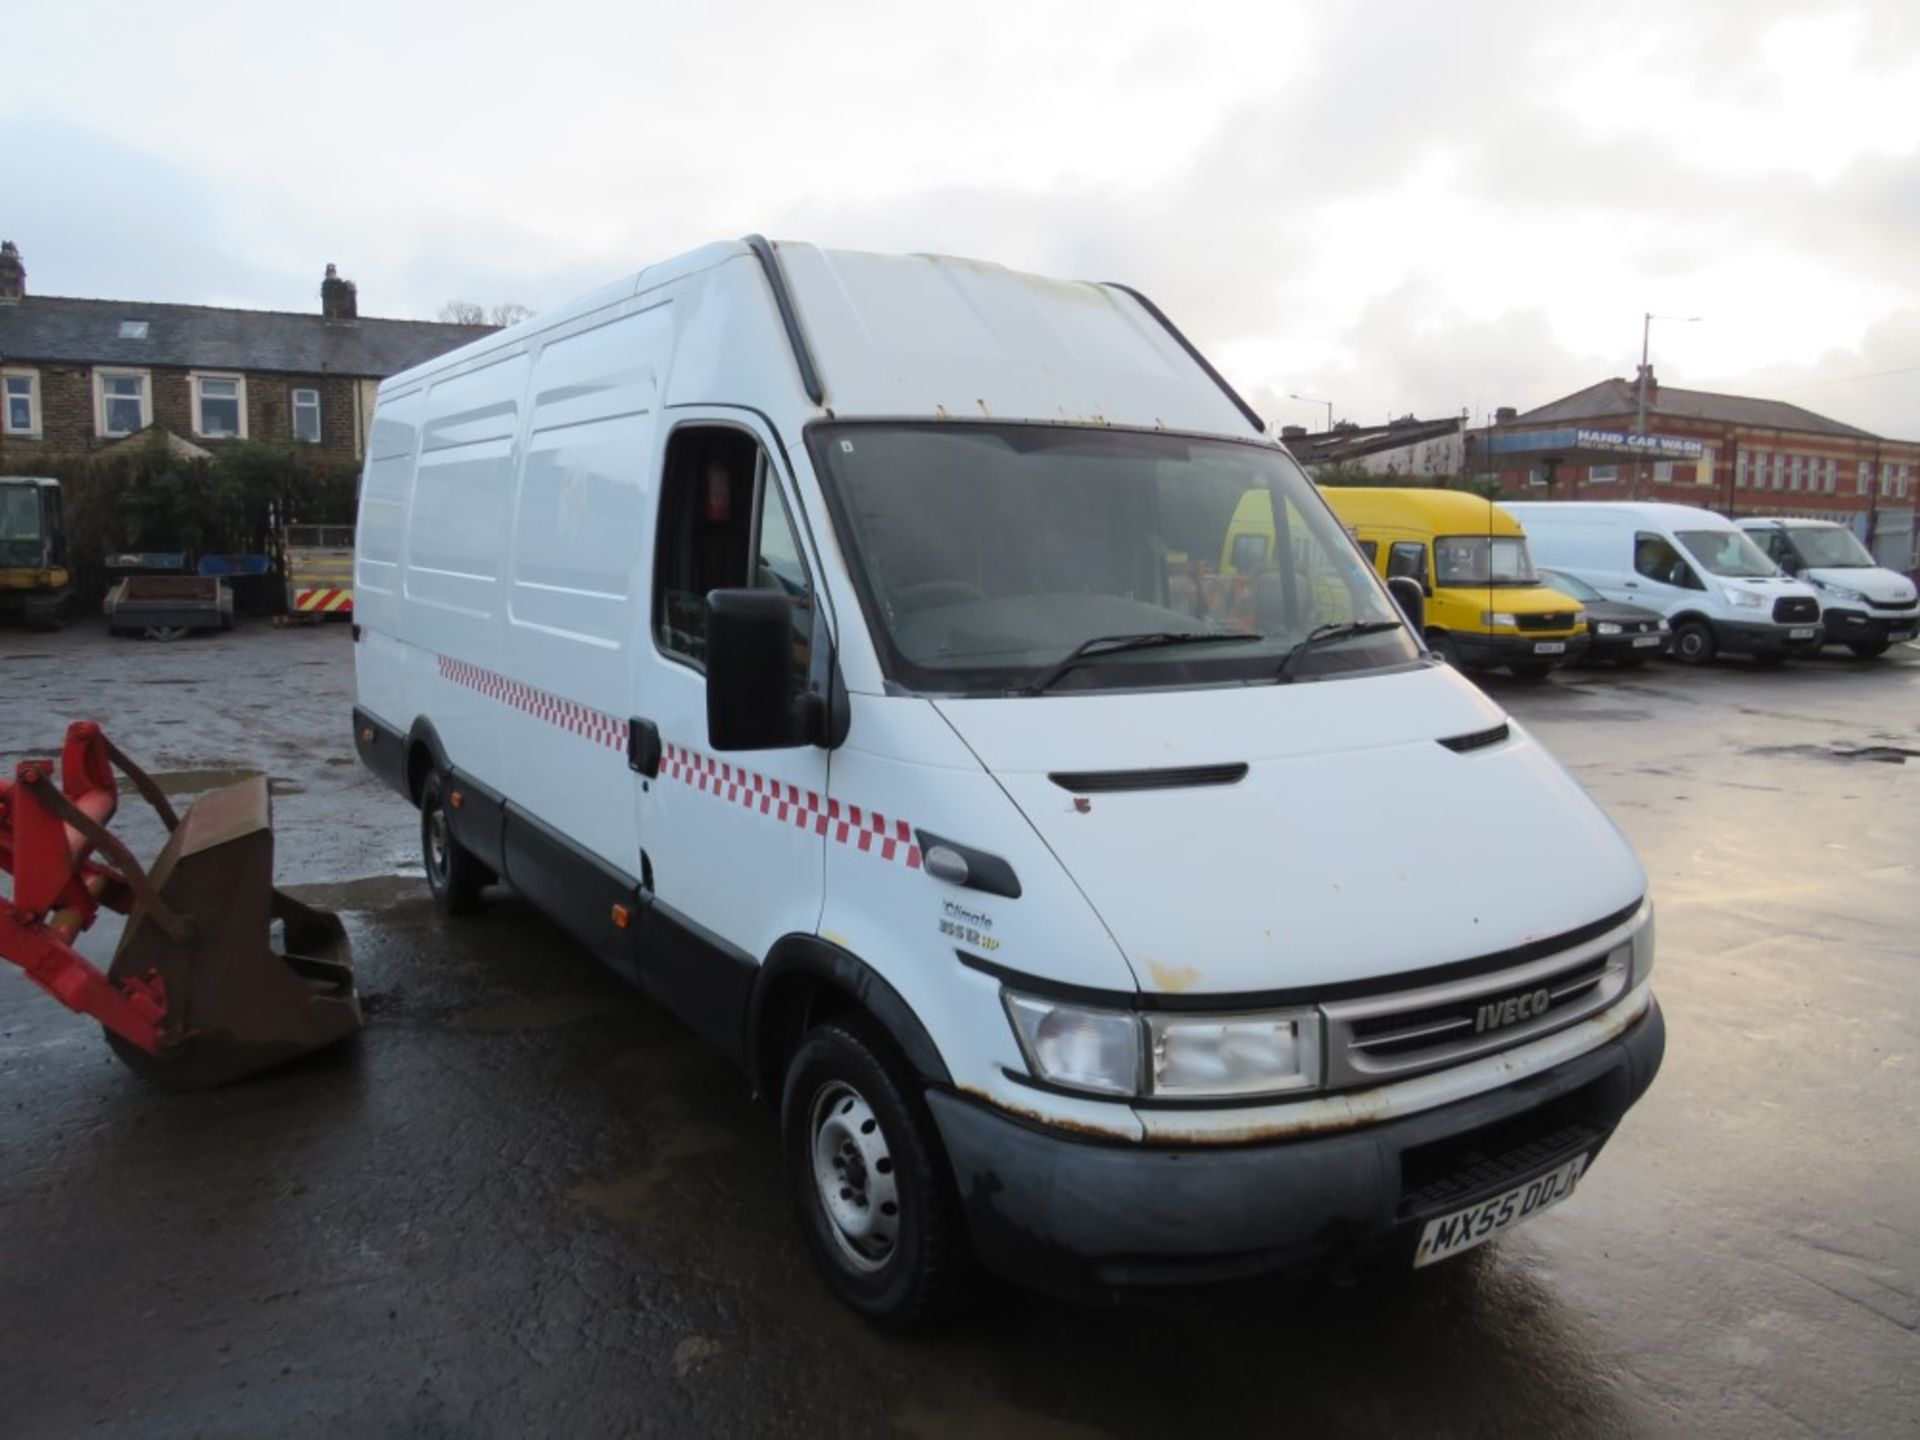 55 reg IVECO DAILY 35S12 LWB (DIRCT GTR M/C FIRE) 1ST REG 09/05, 91703M, V5 HERE, 1 OWNER FROM